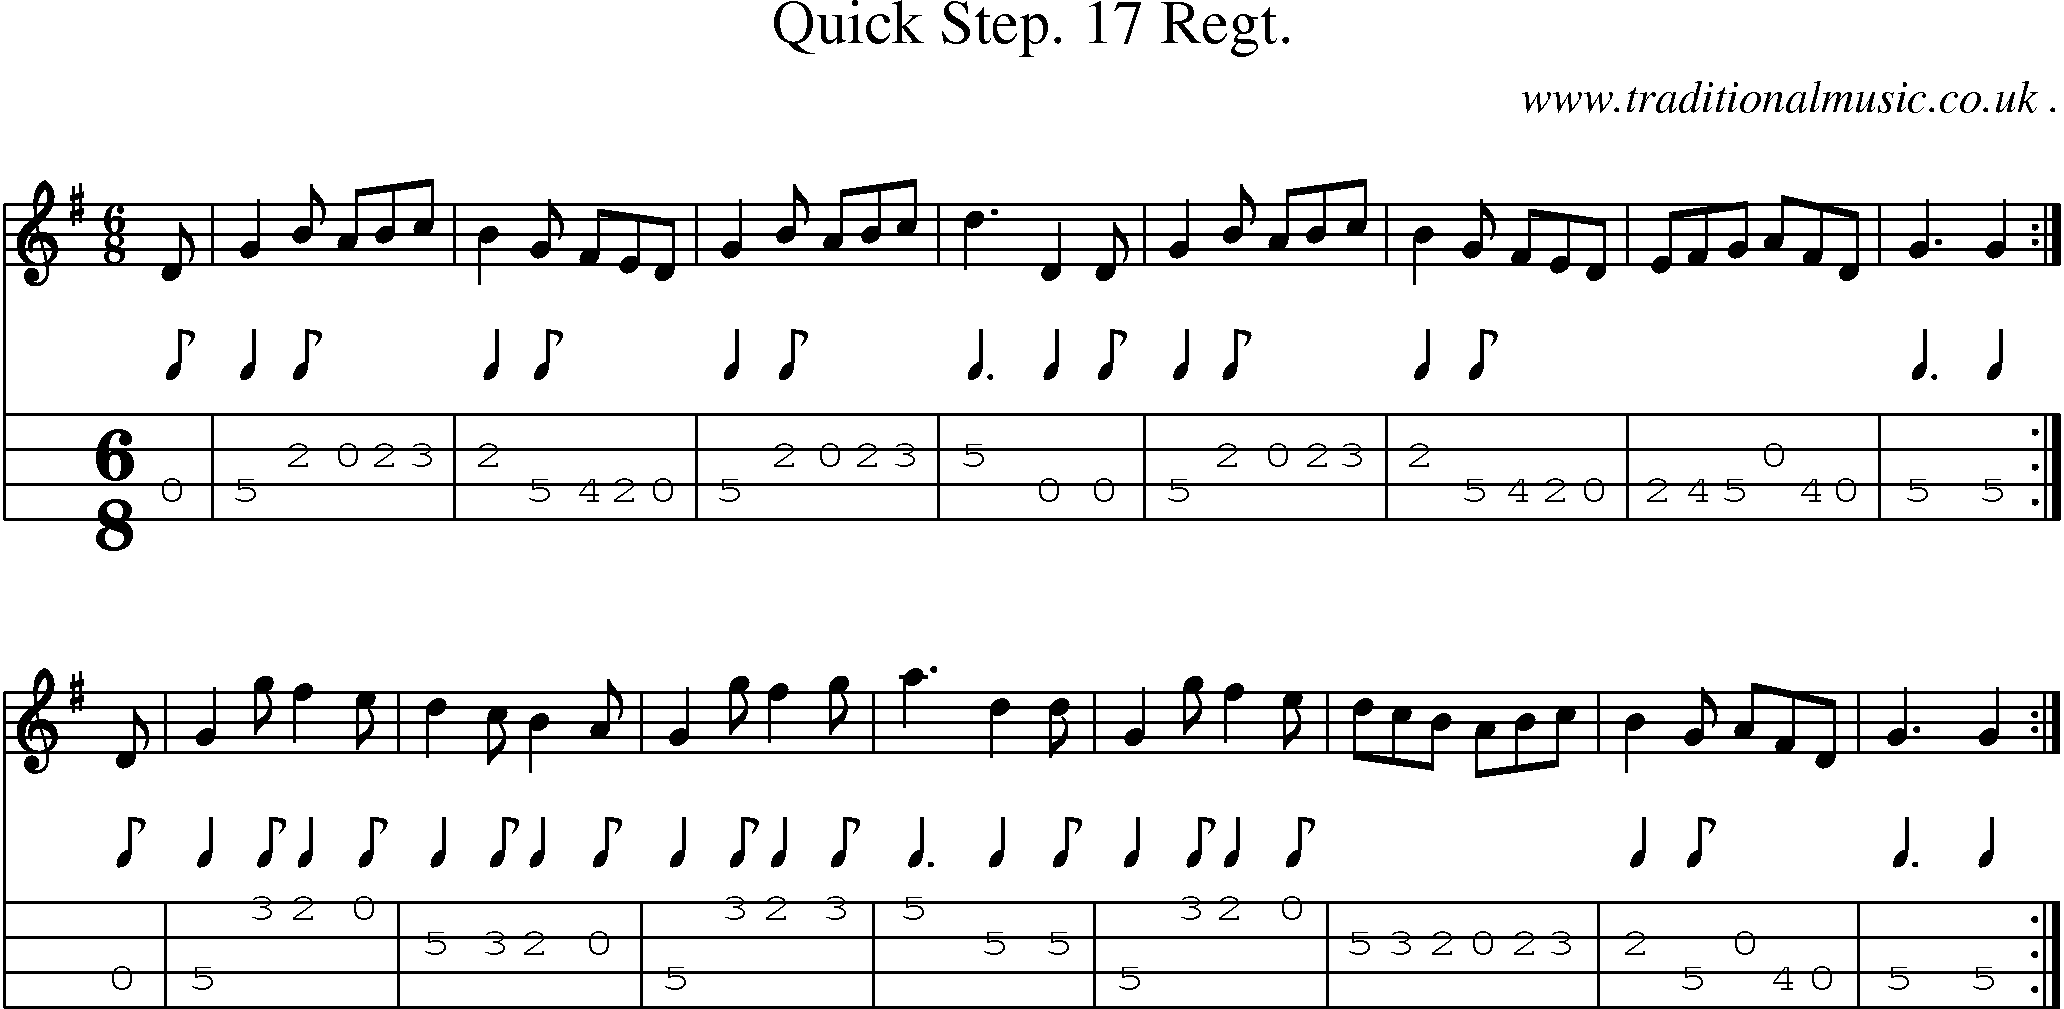 Sheet-music  score, Chords and Mandolin Tabs for Quick Step 17 Regt